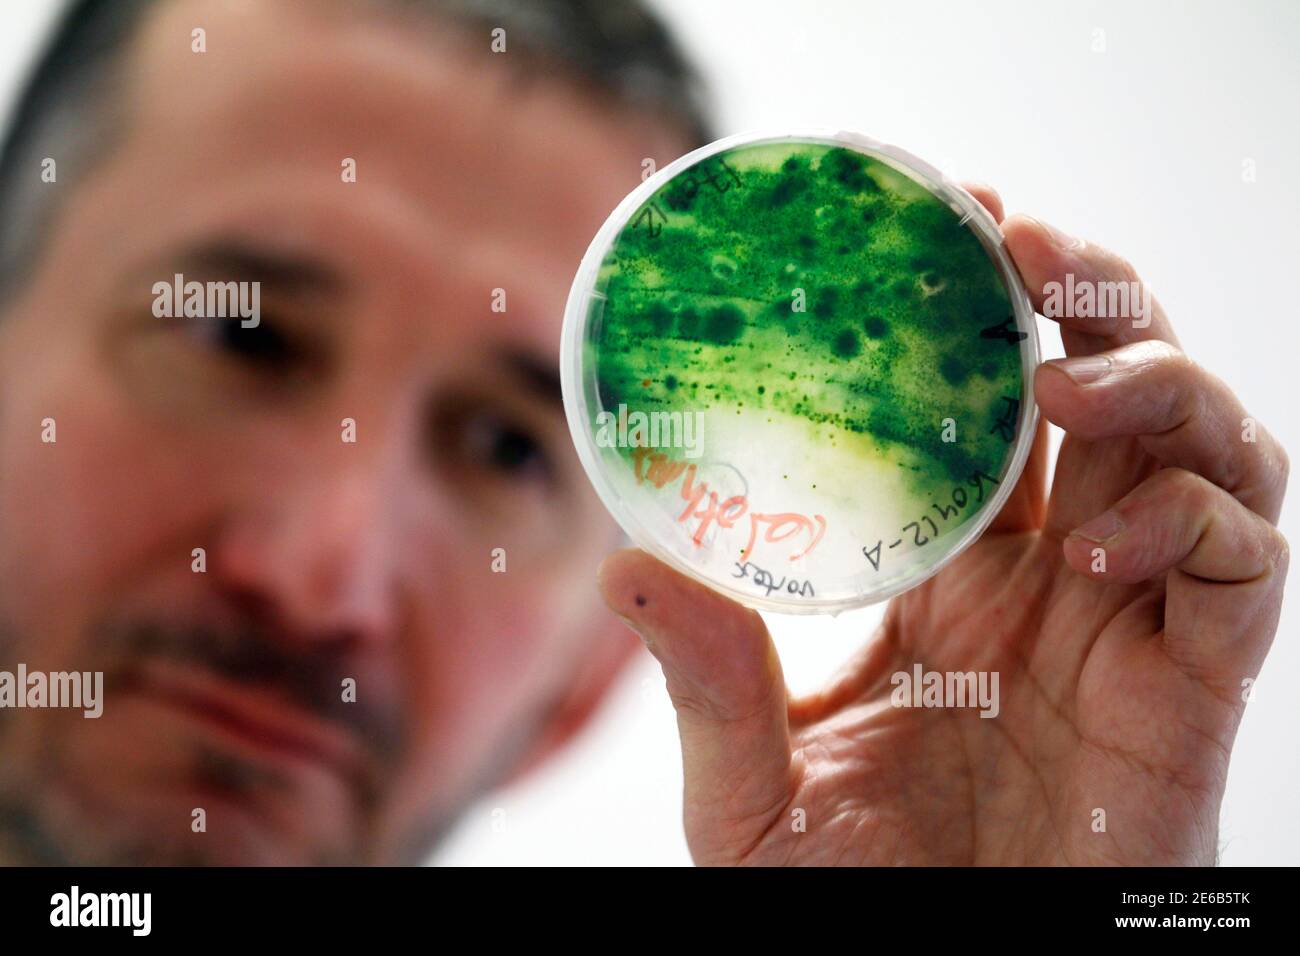 Pierre Calleja, manager of French firm Fermentalg, specializing in  ichthyology, checks microalgae bred in his laboratory in Libourne,  southwestern France, December 11, 2012. Calleja announced to have  successfully tested a third generation